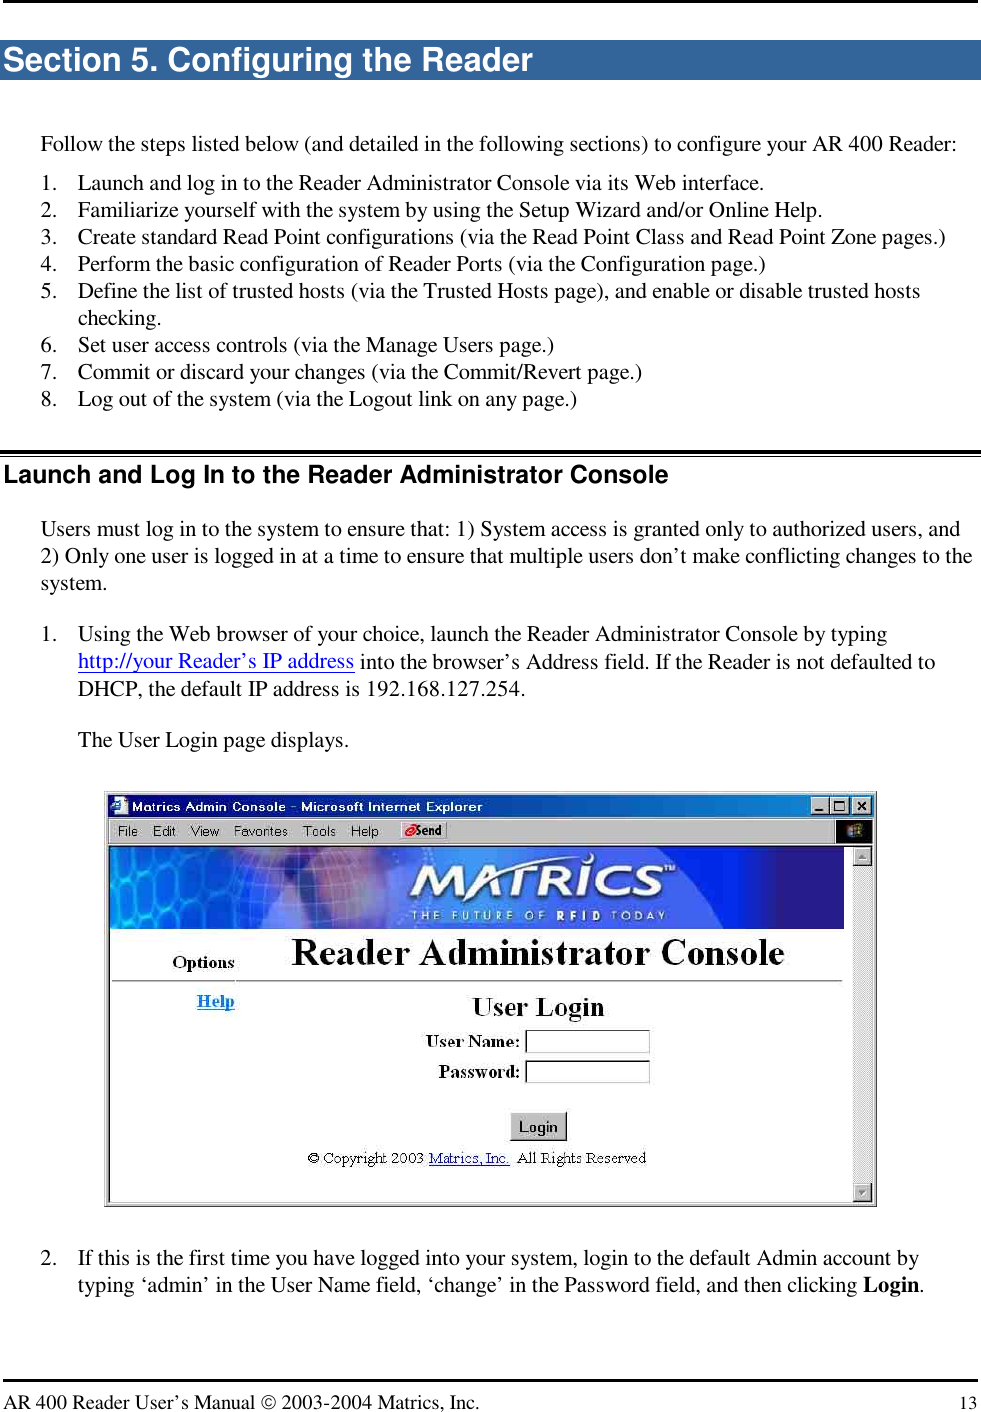   AR 400 Reader User’s Manual  2003-2004 Matrics, Inc.  13 Section 5. Configuring the Reader Follow the steps listed below (and detailed in the following sections) to configure your AR 400 Reader: 1.  Launch and log in to the Reader Administrator Console via its Web interface. 2.  Familiarize yourself with the system by using the Setup Wizard and/or Online Help. 3.  Create standard Read Point configurations (via the Read Point Class and Read Point Zone pages.) 4.  Perform the basic configuration of Reader Ports (via the Configuration page.) 5.  Define the list of trusted hosts (via the Trusted Hosts page), and enable or disable trusted hosts checking. 6.  Set user access controls (via the Manage Users page.) 7.  Commit or discard your changes (via the Commit/Revert page.) 8.  Log out of the system (via the Logout link on any page.) Launch and Log In to the Reader Administrator Console Users must log in to the system to ensure that: 1) System access is granted only to authorized users, and 2) Only one user is logged in at a time to ensure that multiple users don’t make conflicting changes to the system. 1.  Using the Web browser of your choice, launch the Reader Administrator Console by typing http://your Reader’s IP address into the browser’s Address field. If the Reader is not defaulted to DHCP, the default IP address is 192.168.127.254. The User Login page displays.  2.  If this is the first time you have logged into your system, login to the default Admin account by typing ‘admin’ in the User Name field, ‘change’ in the Password field, and then clicking Login. 